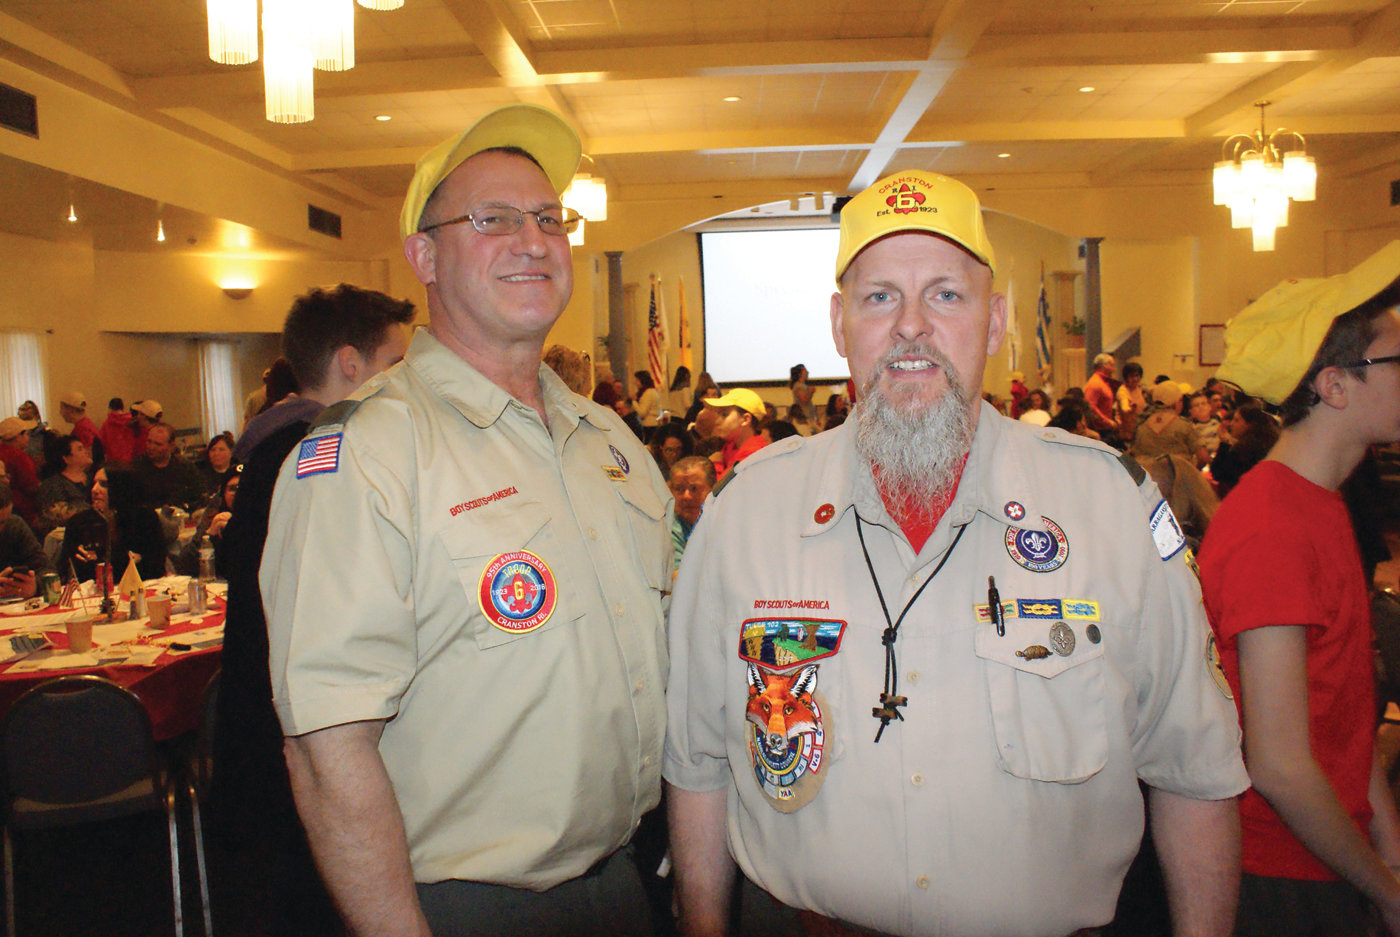 LEADERSHIP: Pictured are Troop 6 Cranston Assistant Scoutmaster Dave Steets and Scoutmaster Jim Bennett during the 28th annual Macaroni Dinner.